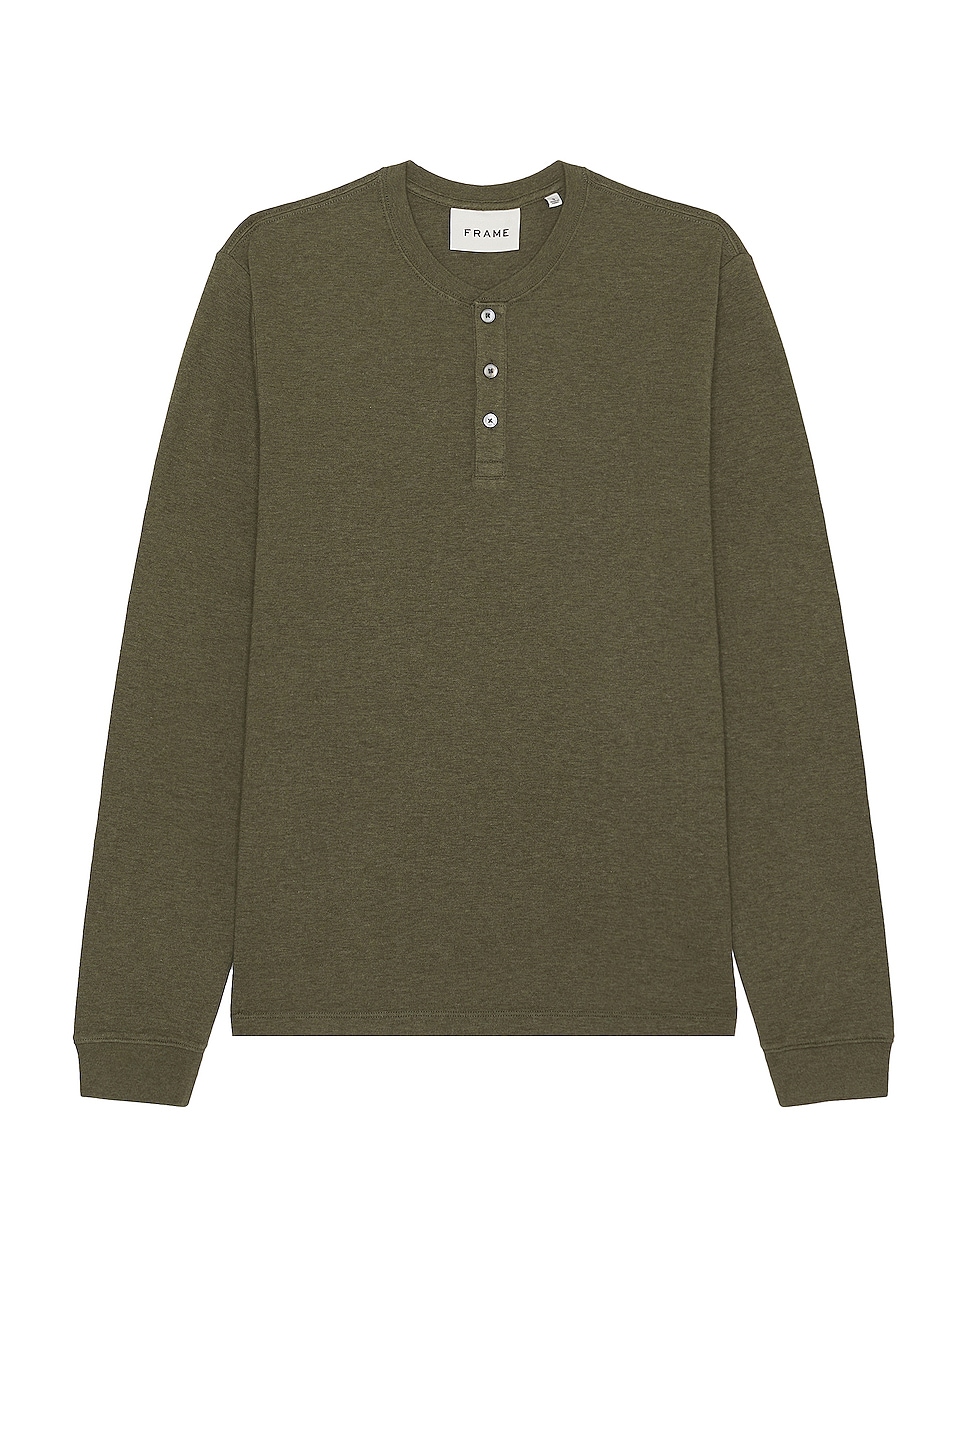 Image 1 of FRAME Duo Fold Long Sleeve Henley in Dark Olive Heather